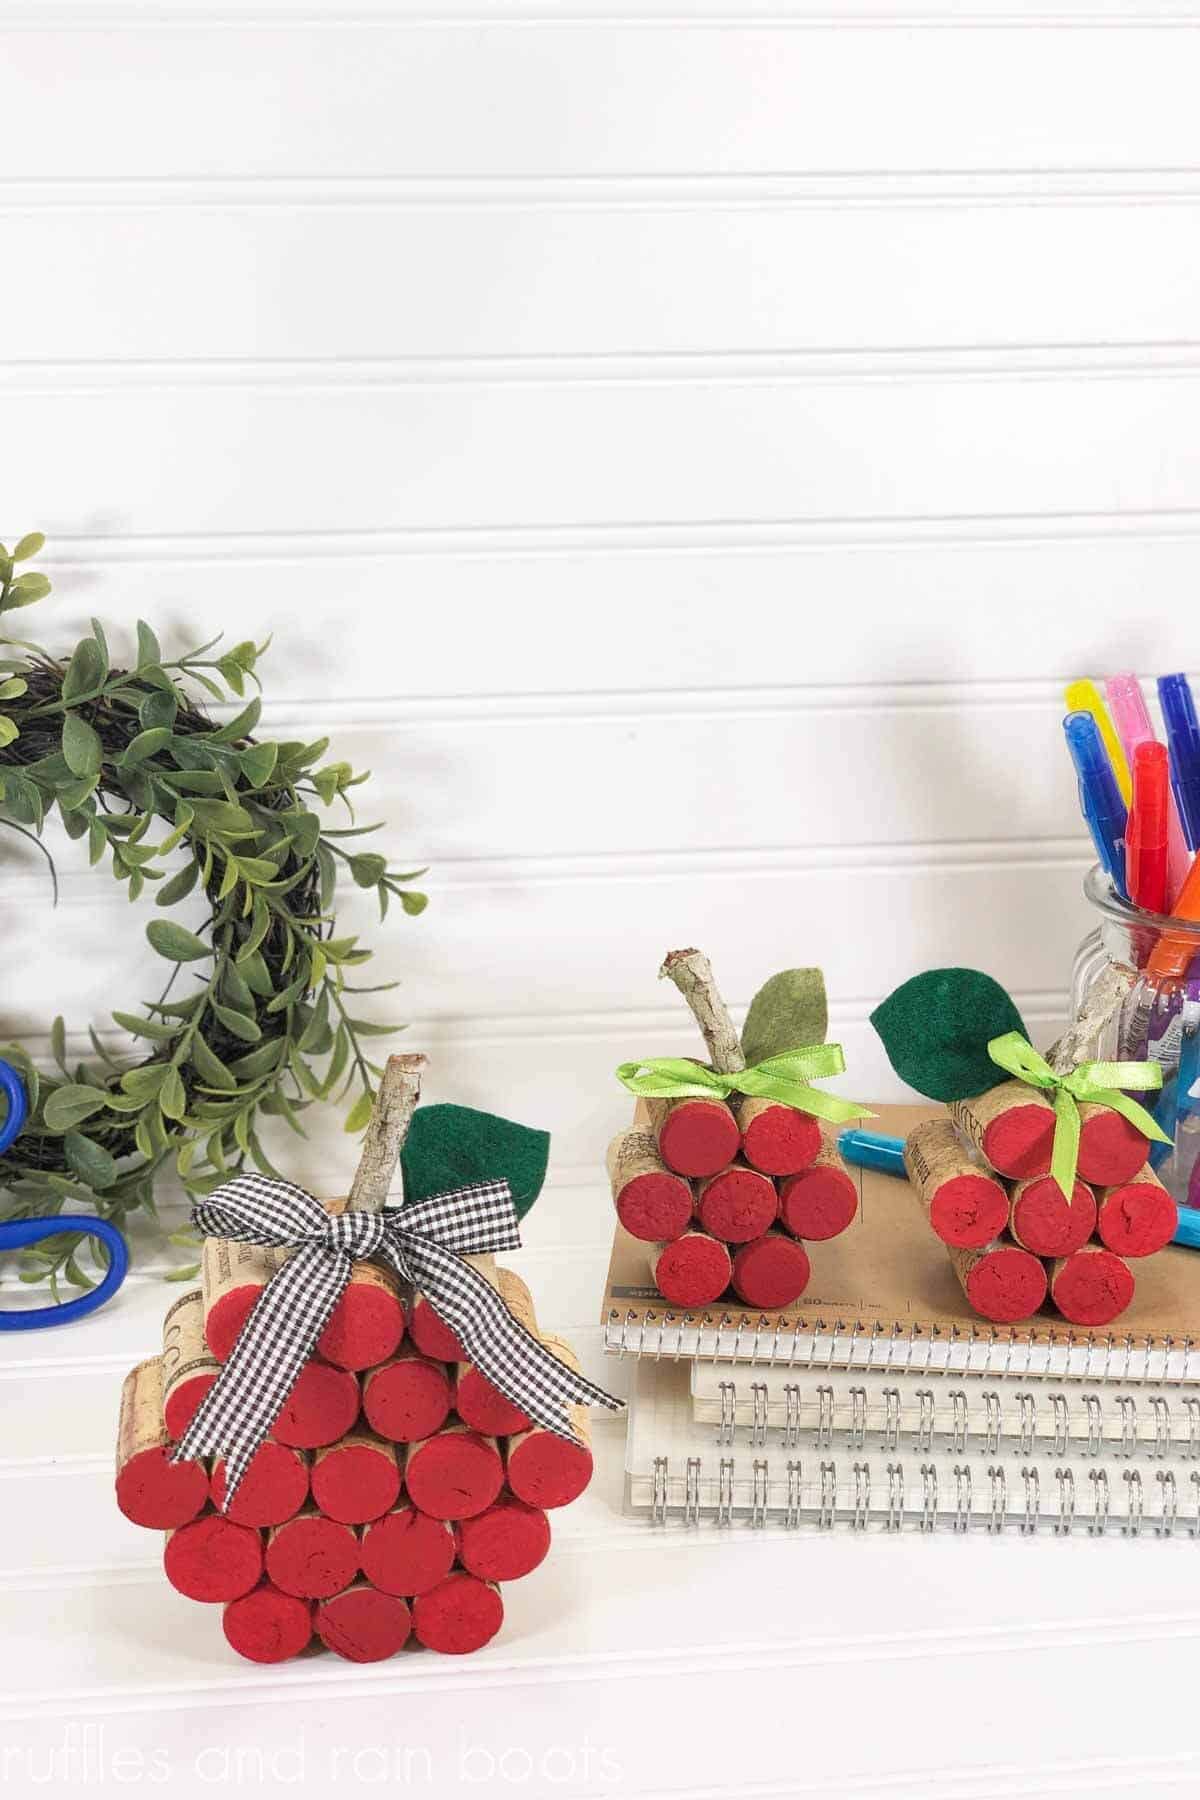 Vertical image of wine cork apples made for a back to school craft in front of a white background with school supplies and a wreath.